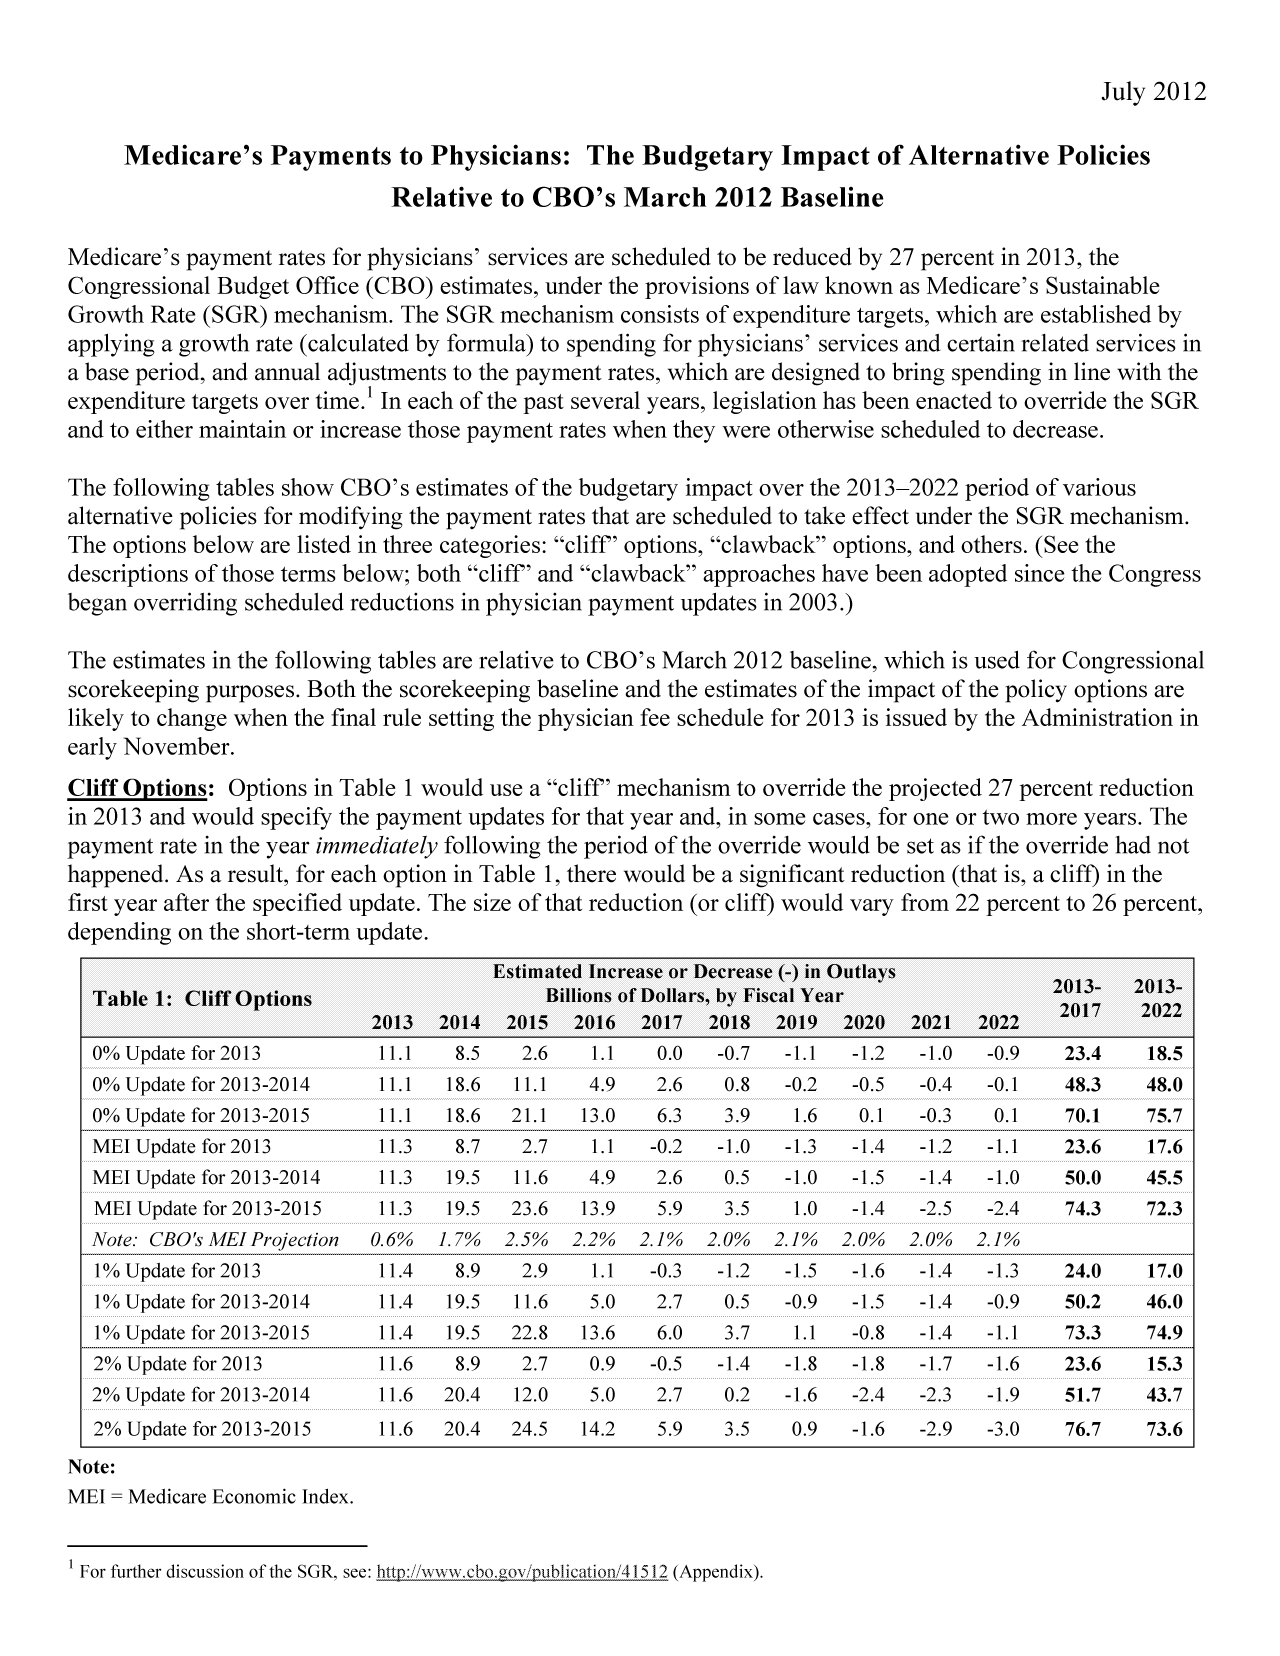 handle is hein.congrec/cbo10830 and id is 1 raw text is: July 2012
Medicare's Payments to Physicians: The Budgetary Impact of Alternative Policies
Relative to CBO's March 2012 Baseline
Medicare's payment rates for physicians' services are scheduled to be reduced by 27 percent in 2013, the
Congressional Budget Office (CBO) estimates, under the provisions of law known as Medicare's Sustainable
Growth Rate (SGR) mechanism. The SGR mechanism consists of expenditure targets, which are established by
applying a growth rate (calculated by formula) to spending for physicians' services and certain related services in
a base period, and annual adjustments to the payment rates, which are designed to bring spending in line with the
expenditure targets over time.' In each of the past several years, legislation has been enacted to override the SGR
and to either maintain or increase those payment rates when they were otherwise scheduled to decrease.
The following tables show CBO's estimates of the budgetary impact over the 2013-2022 period of various
alternative policies for modifying the payment rates that are scheduled to take effect under the SGR mechanism.
The options below are listed in three categories: cliff' options, clawback options, and others. (See the
descriptions of those terms below; both cliff' and clawback approaches have been adopted since the Congress
began overriding scheduled reductions in physician payment updates in 2003.)
The estimates in the following tables are relative to CBO's March 2012 baseline, which is used for Congressional
scorekeeping purposes. Both the scorekeeping baseline and the estimates of the impact of the policy options are
likely to change when the final rule setting the physician fee schedule for 2013 is issued by the Administration in
early November.
Cliff Options: Options in Table 1 would use a cliff' mechanism to override the projected 27 percent reduction
in 2013 and would specify the payment updates for that year and, in some cases, for one or two more years. The
payment rate in the year immediately following the period of the override would be set as if the override had not
happened. As a result, for each option in Table 1, there would be a significant reduction (that is, a cliff) in the
first year after the specified update. The size of that reduction (or cliff) would vary from 22 percent to 26 percent,
depending on the short-term update.
Estimated Increase or Decrease (-) in Outlays       2013-   2013
Table 1: Cliff Options                    Billions of Dollars, by Fiscal Year             21-     2  -
2013  2014   2015  2016  2017   2018  2019  2020  2021   2022
0% Update for 2013         11.1   8.5   2.6   1.1   0.0   -0.7  -1.1  -1.2   -1.0  -0.9   23.4    18.5
0% Update for 2013-2014    11.1  18.6  11.1   4.9   2.6    0.8  -0.2  -0.5   -0.4  -0.1   48.3    48.0
0% Update for 2013-2015    11.1  18.6  21.1  13.0   6.3    3.9   1.6   0.1  -0.3    0.1   70.1    75.7
MEIlUpdate for 2013        11.3   8.7   2.7   1.1   -0.2  -1.0  -1.3  -1.4   -1.2  -1.1   23.6    17.6
MEI Update for 2013-2014   11.3  19.5  11.6   4.9   2.6    0.5  -1.0  -1.5   -1.4  -1.0   50.0    45.5
MEI Update for 2013-2015   11.3  19.5  23.6  13.9   5.9    3.5   1.0  -1.4  -2.5   -2.4   74.3    72.3
Note. CBO'sMEIProjection  O.6%  1.70%  2.5%o  2.2%o  2.l1%  2.O0%  2.l1%  2.O0%  2.O0%  2.l1%
1%oUpdate for 2013        11.4    8.9   2.9   1.1  -0.3   -1.2  -1.5  -1.6  -1.4   -1.3   24.0    17.0
1%oUpdate for 2013-2014   11.4   19.5  11.6   5.0   2.7    0.5  -0.9  - 1.5  - 1.4  -0.9  50.2    46.0
1%oUpdate for 2013-2015   11.4   19.5  22.8  13.6   6.0    3.7   1.1  -0.8  -1.4   -1.1   73.3    74.9
2%oUpdate for 2013        11.6    8.9   2.7   0.9  -0.5   -1.4  -1.8  -1.8   -1.7  -1.6   23.6    15.3
2%oUpdate for 2013-2014    11.6  20.4  12.0   5.0    2.7   0.2  -1.6  -2.4   -2.3  -1.9   51.7    43.7
2%oUpdate for 2013-2015    11.6  20.4  24.5  14.2   5.9    3.5   0.9  -1.6  -2.9   -3.0   76.7    73.6
Note:

MEI = Medicare Economic Index.
I For further discussion of the SGR, see: http://www.cbo.govipublication/41512 (Appendix).


